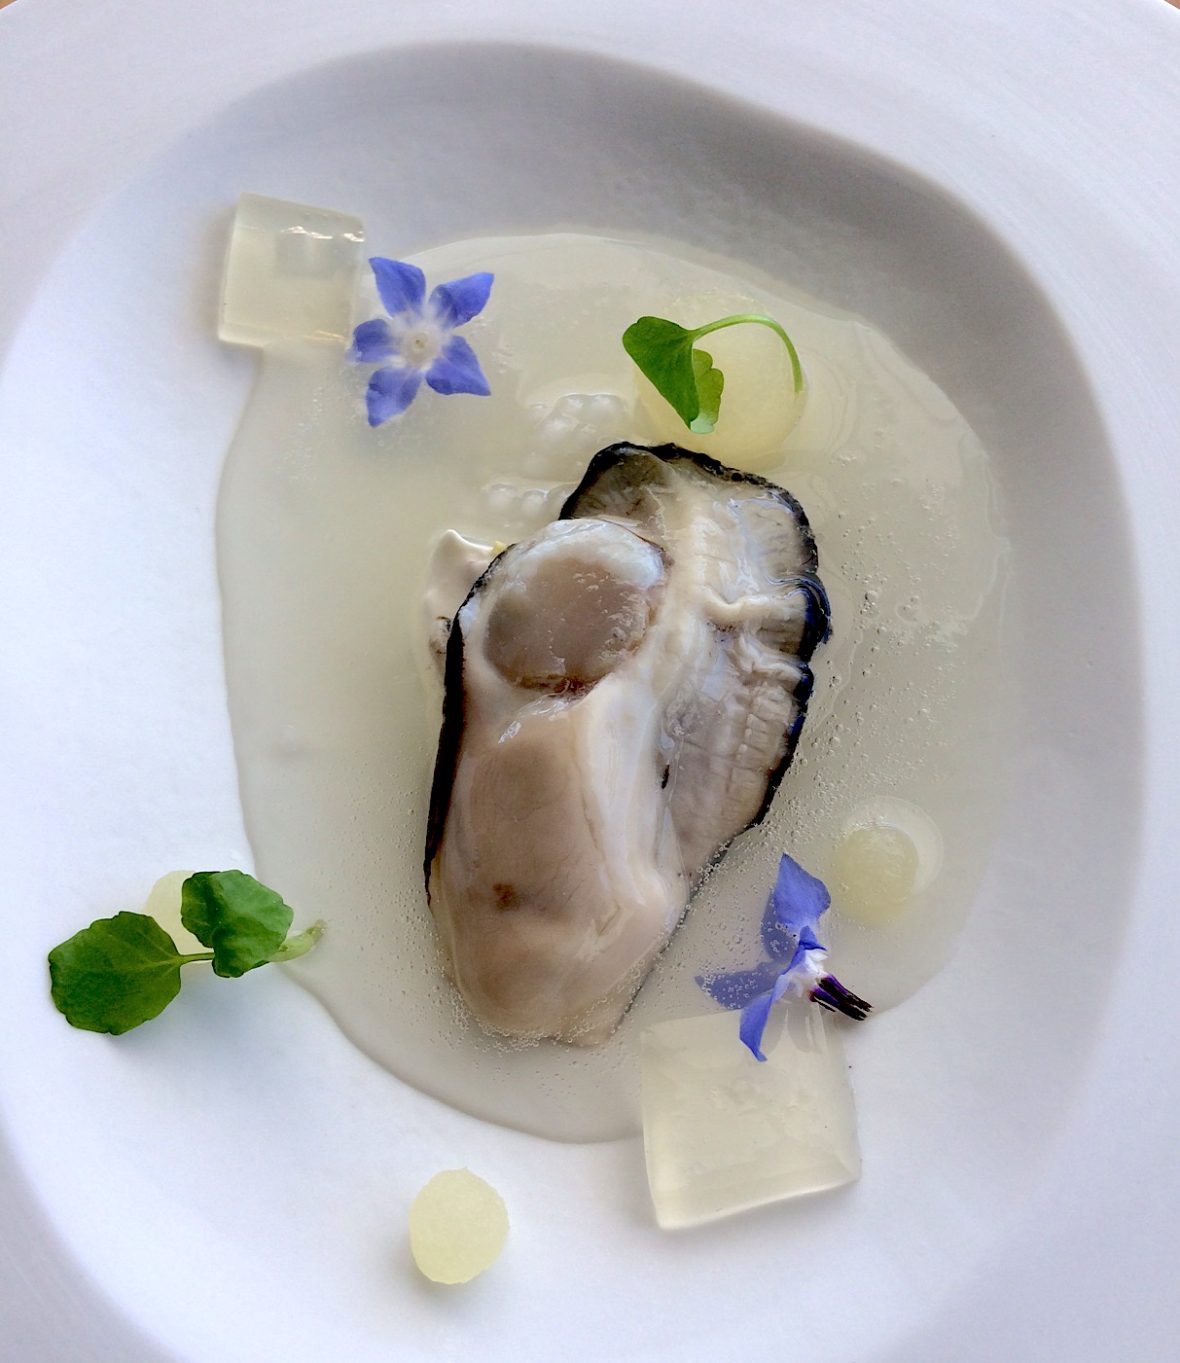 oyster-pear-sauce-mirazur-france